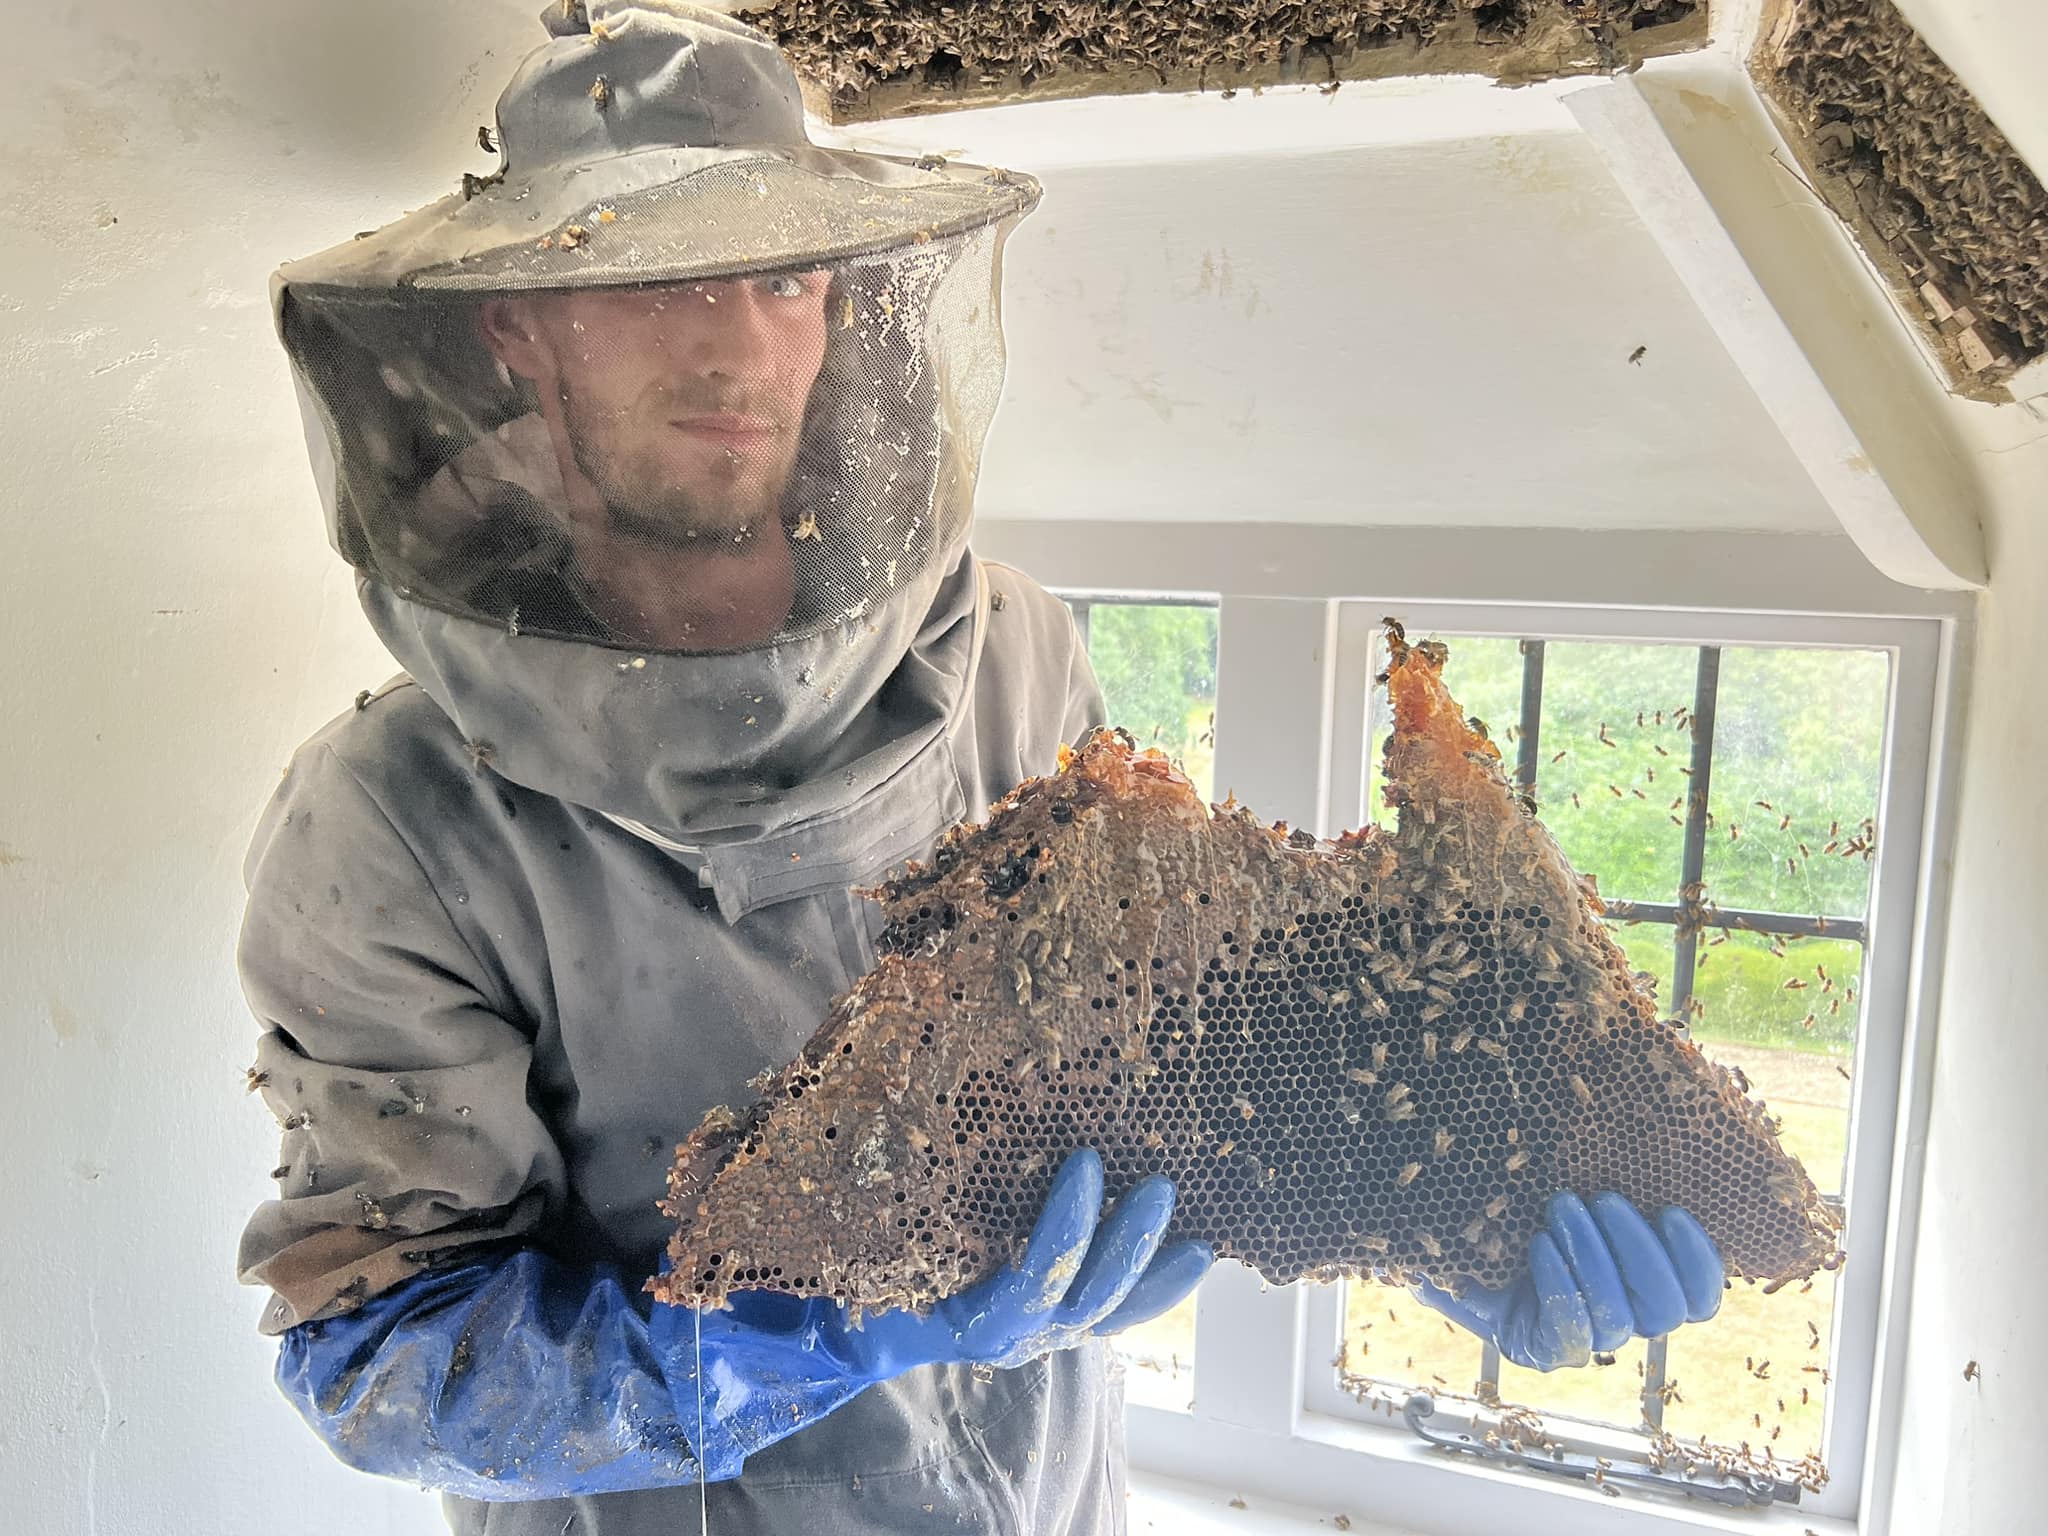 Bee removal from a residential home in the walls